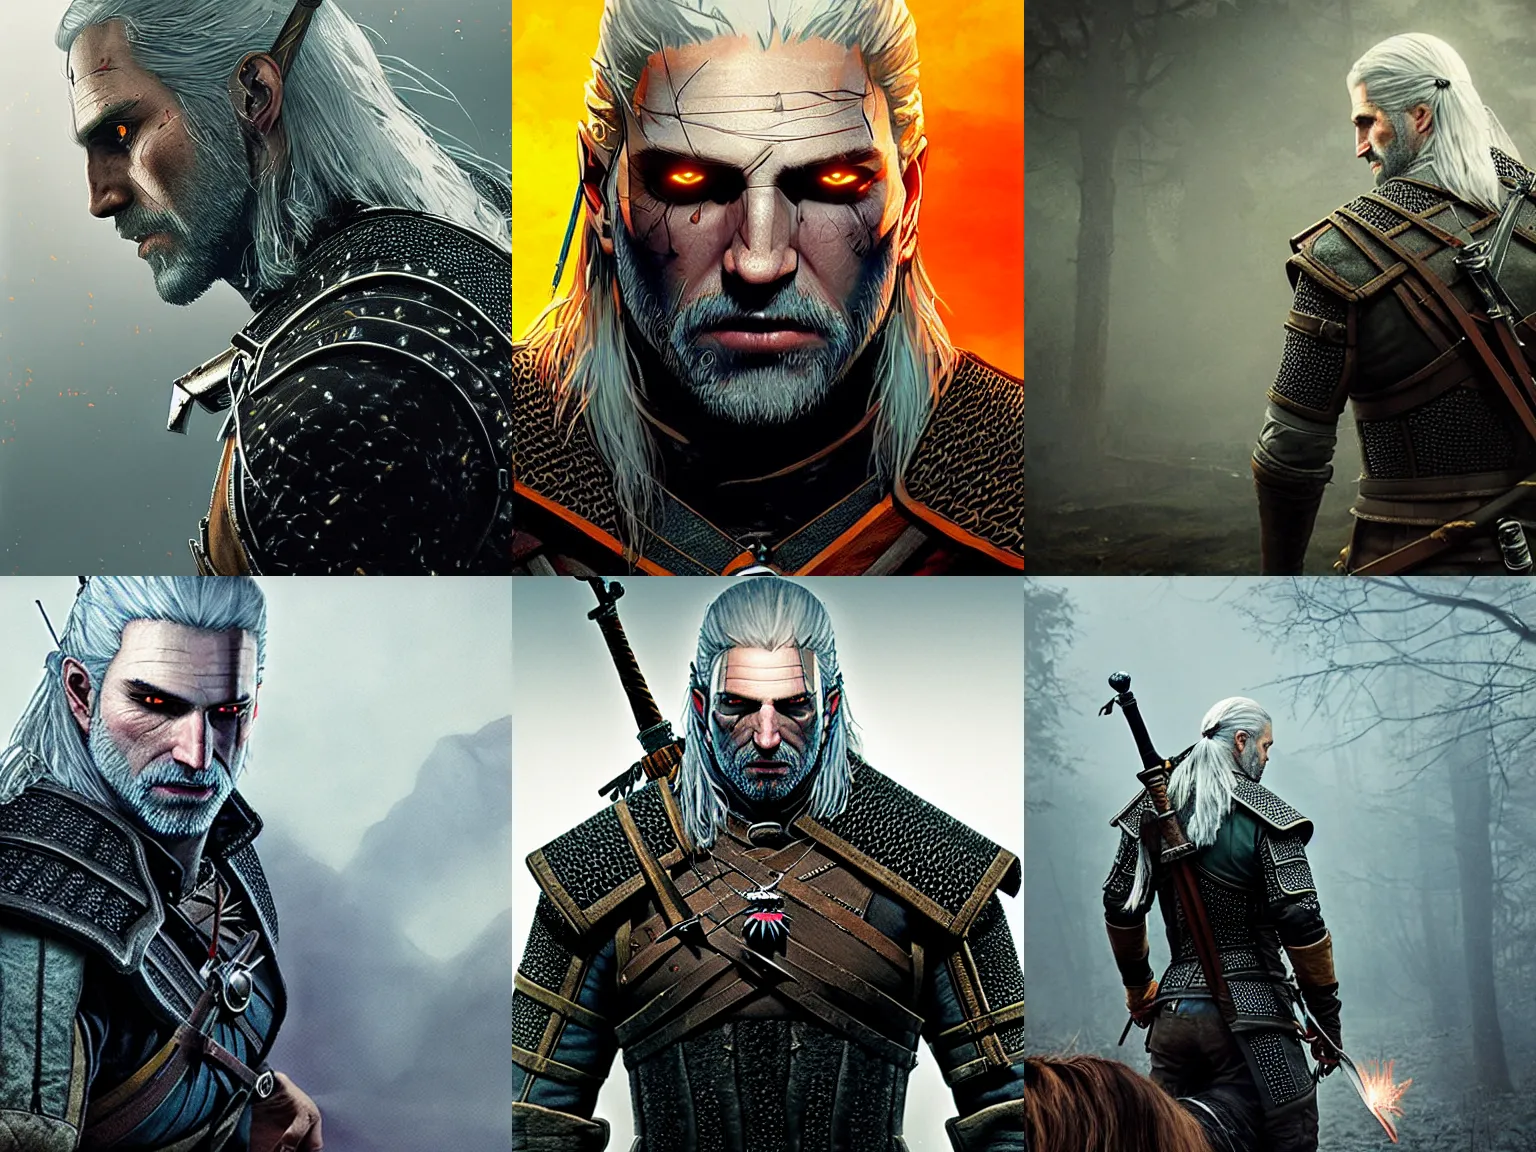 Witcher With Glowing Eyes Illustration Wikiart Stable Diffusion